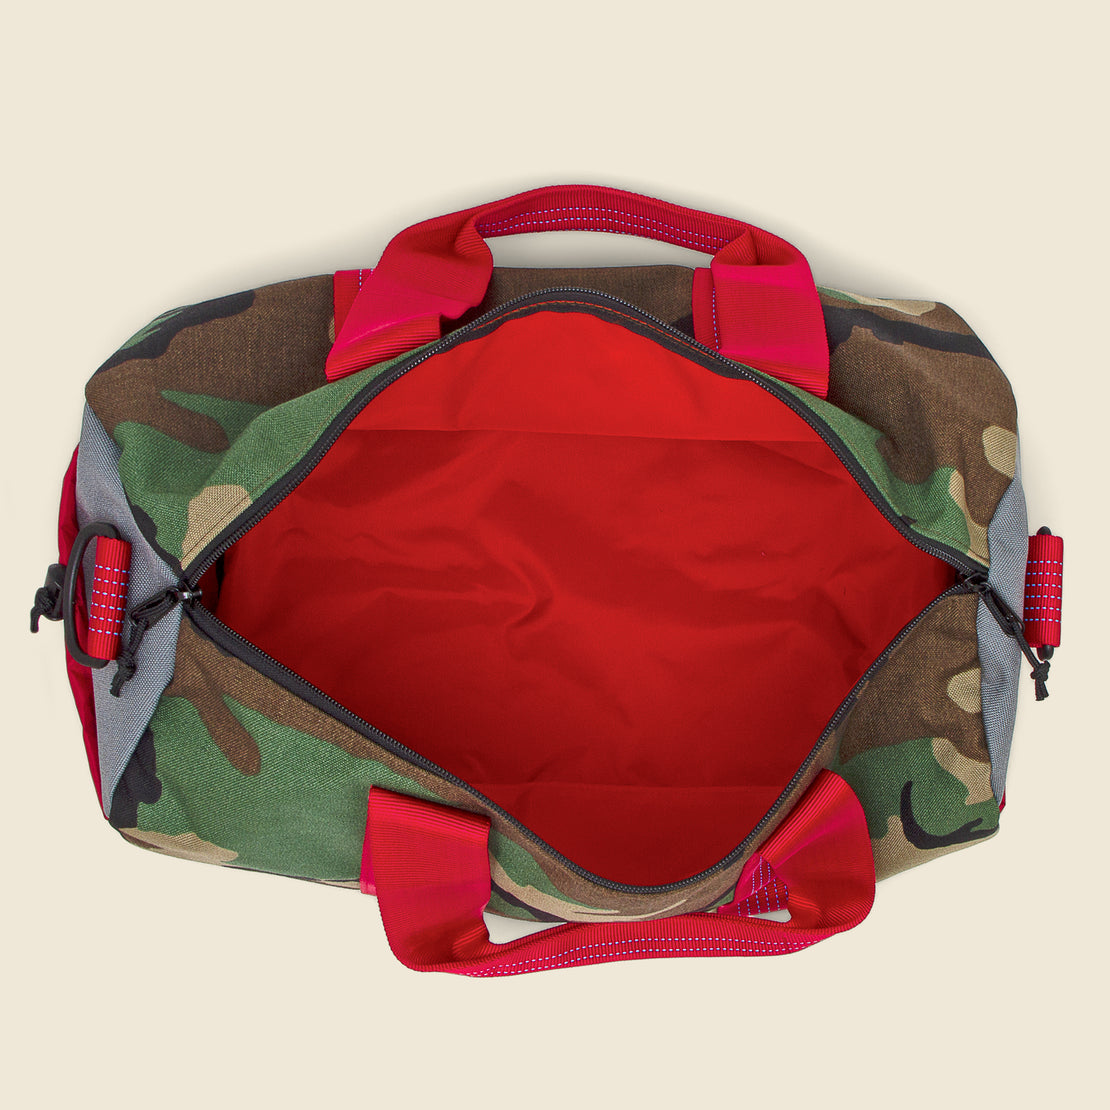 Duffle Bag - MS Woodland Camo - Epperson Mountaineering - STAG Provisions - Accessories - Bags / Luggage